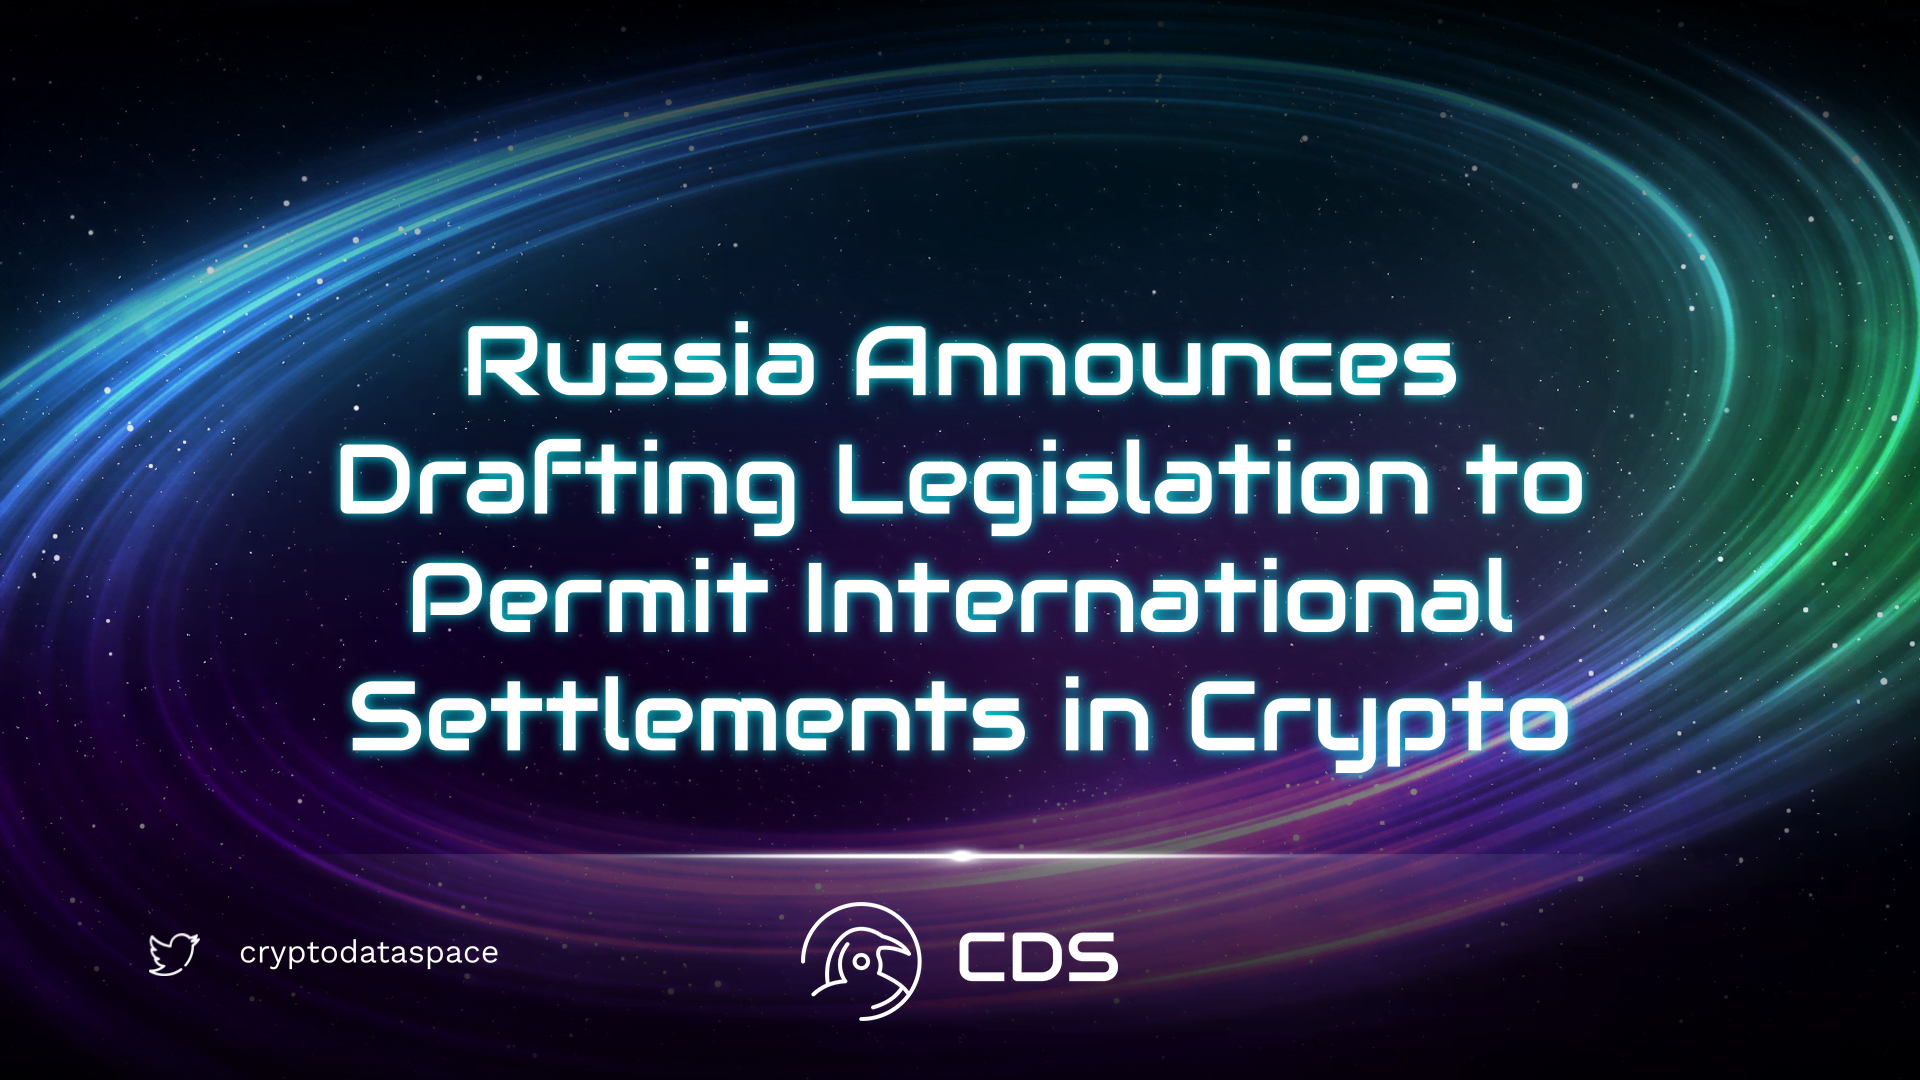 Russia Announces Drafting Legislation to Permit International Settlements in Crypto